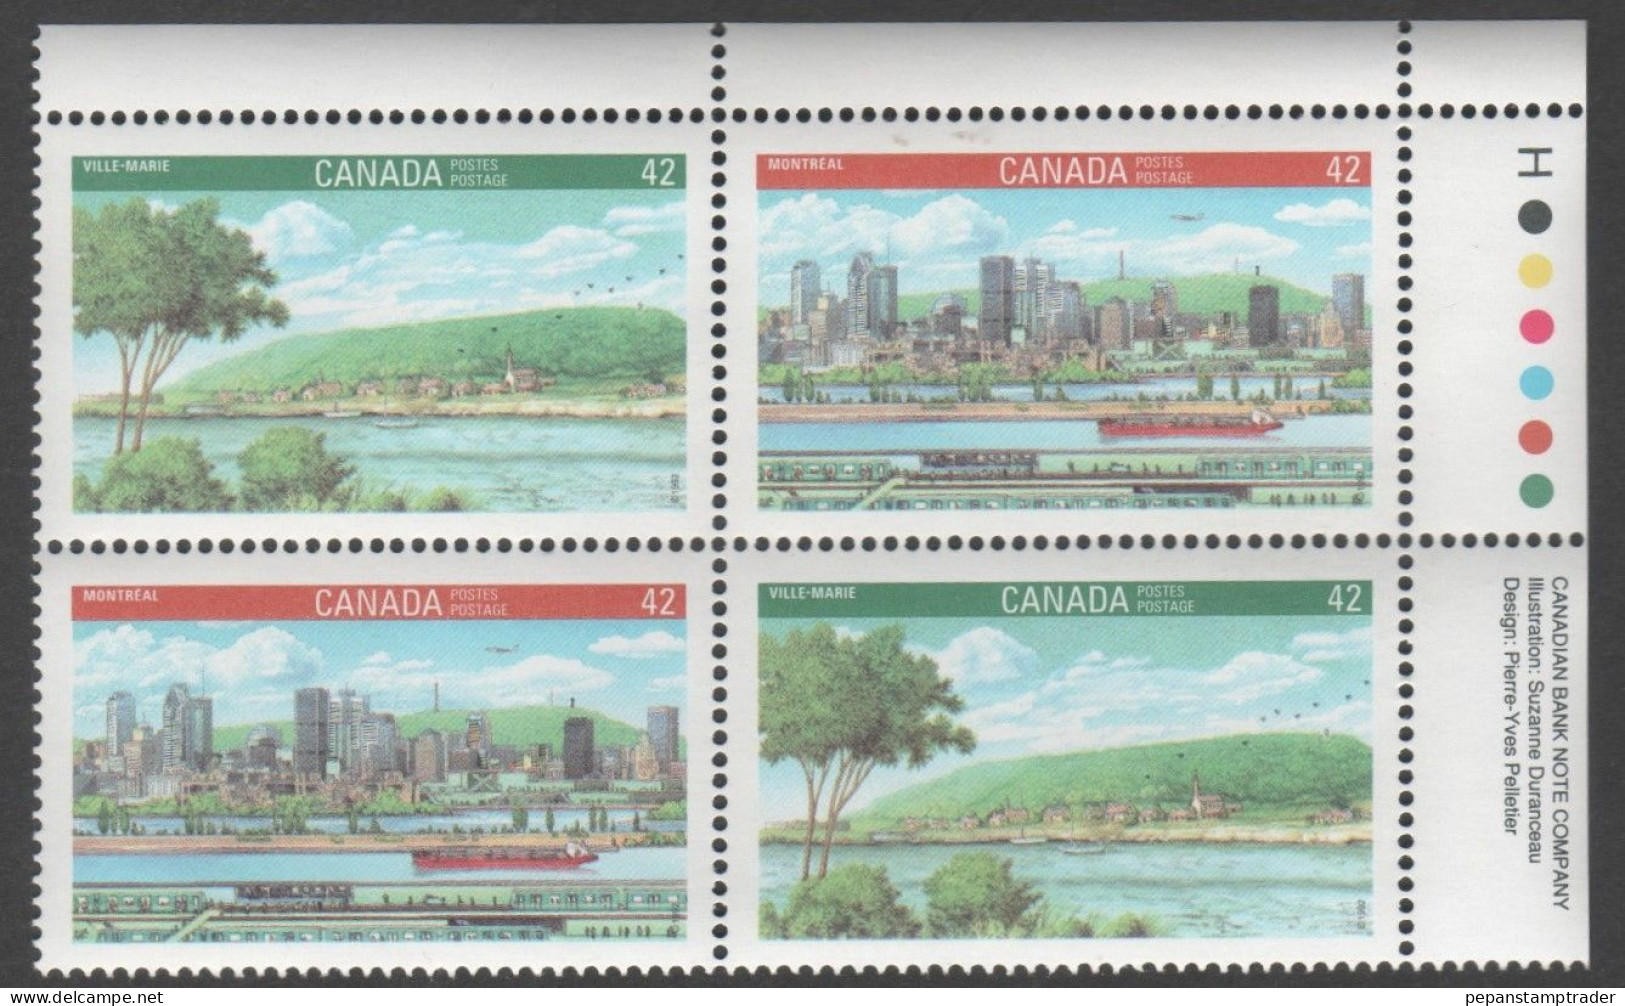 Canada - #1405a - MNH PB - Plate Number & Inscriptions